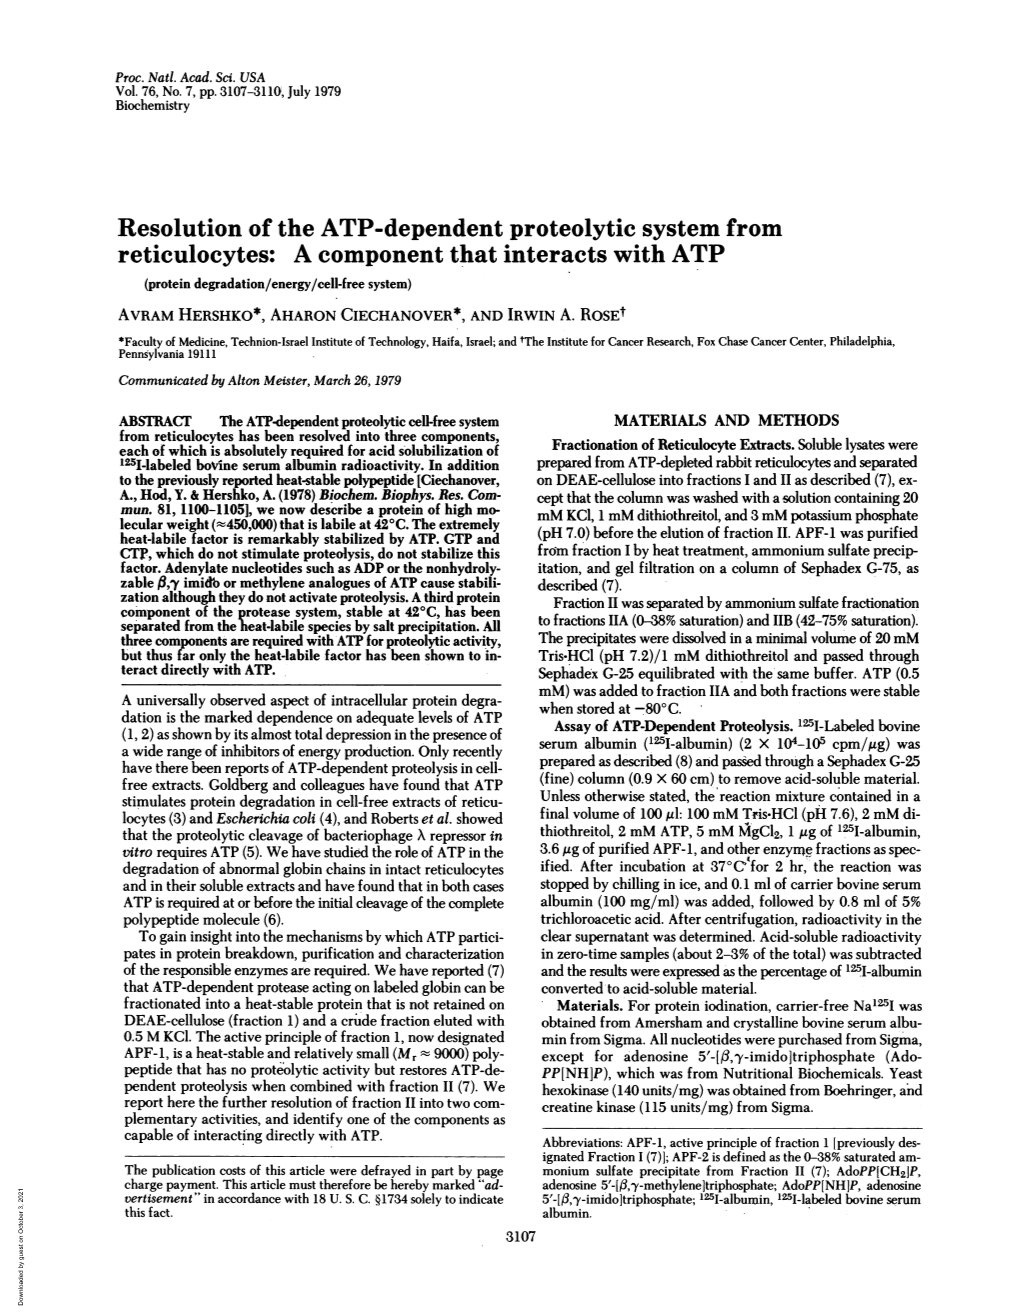 Resolution of the ATP-Dependent Proteolytic System From